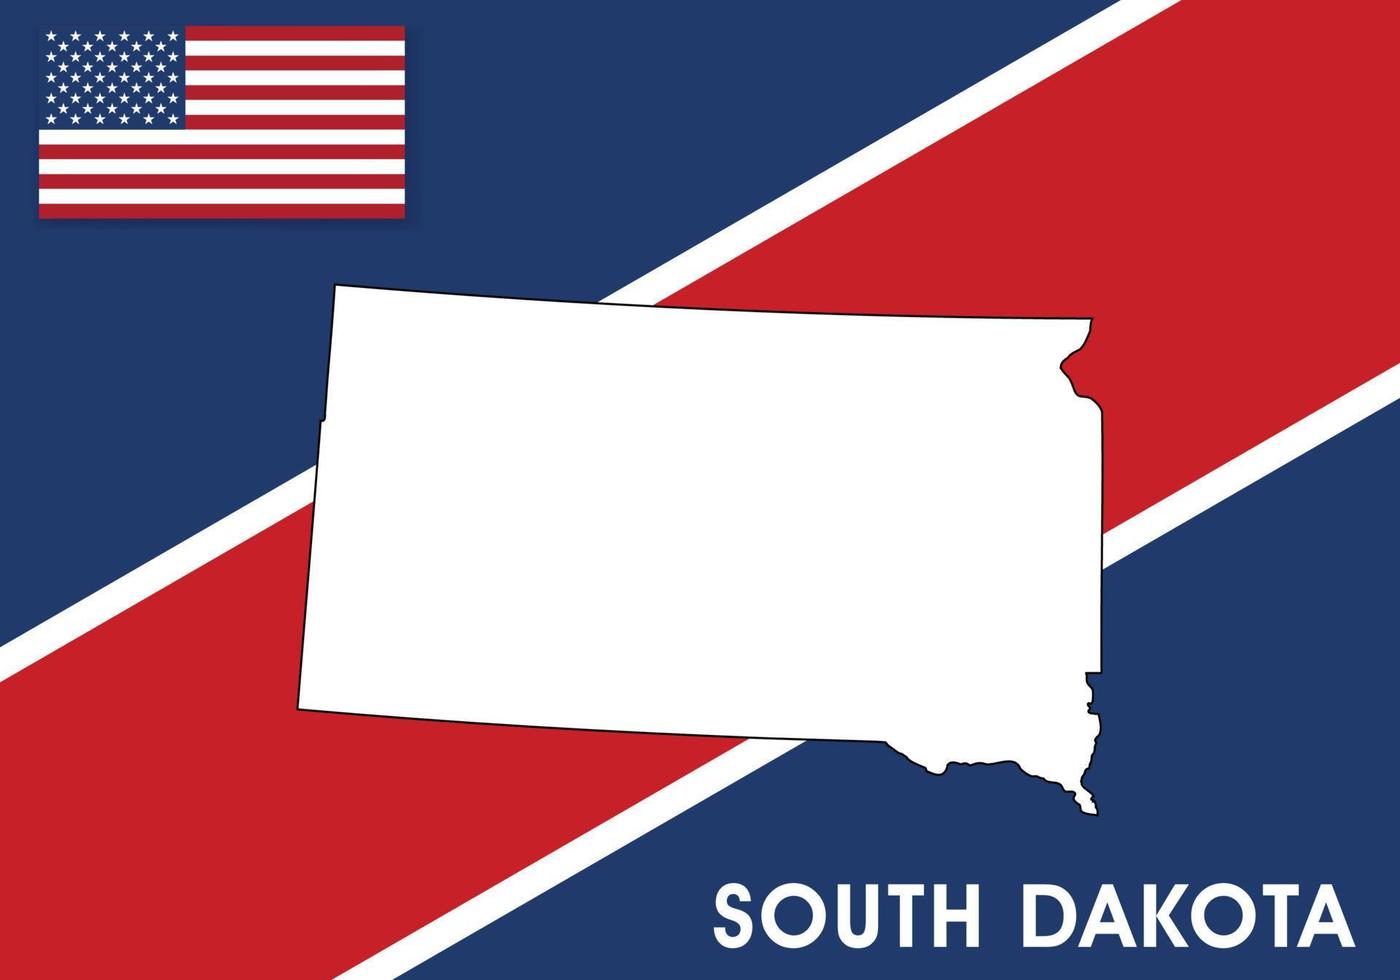 South Dakota - USA, United States of America Map vector template. white color map on flag background for design, infographic - Vector illustration eps 10